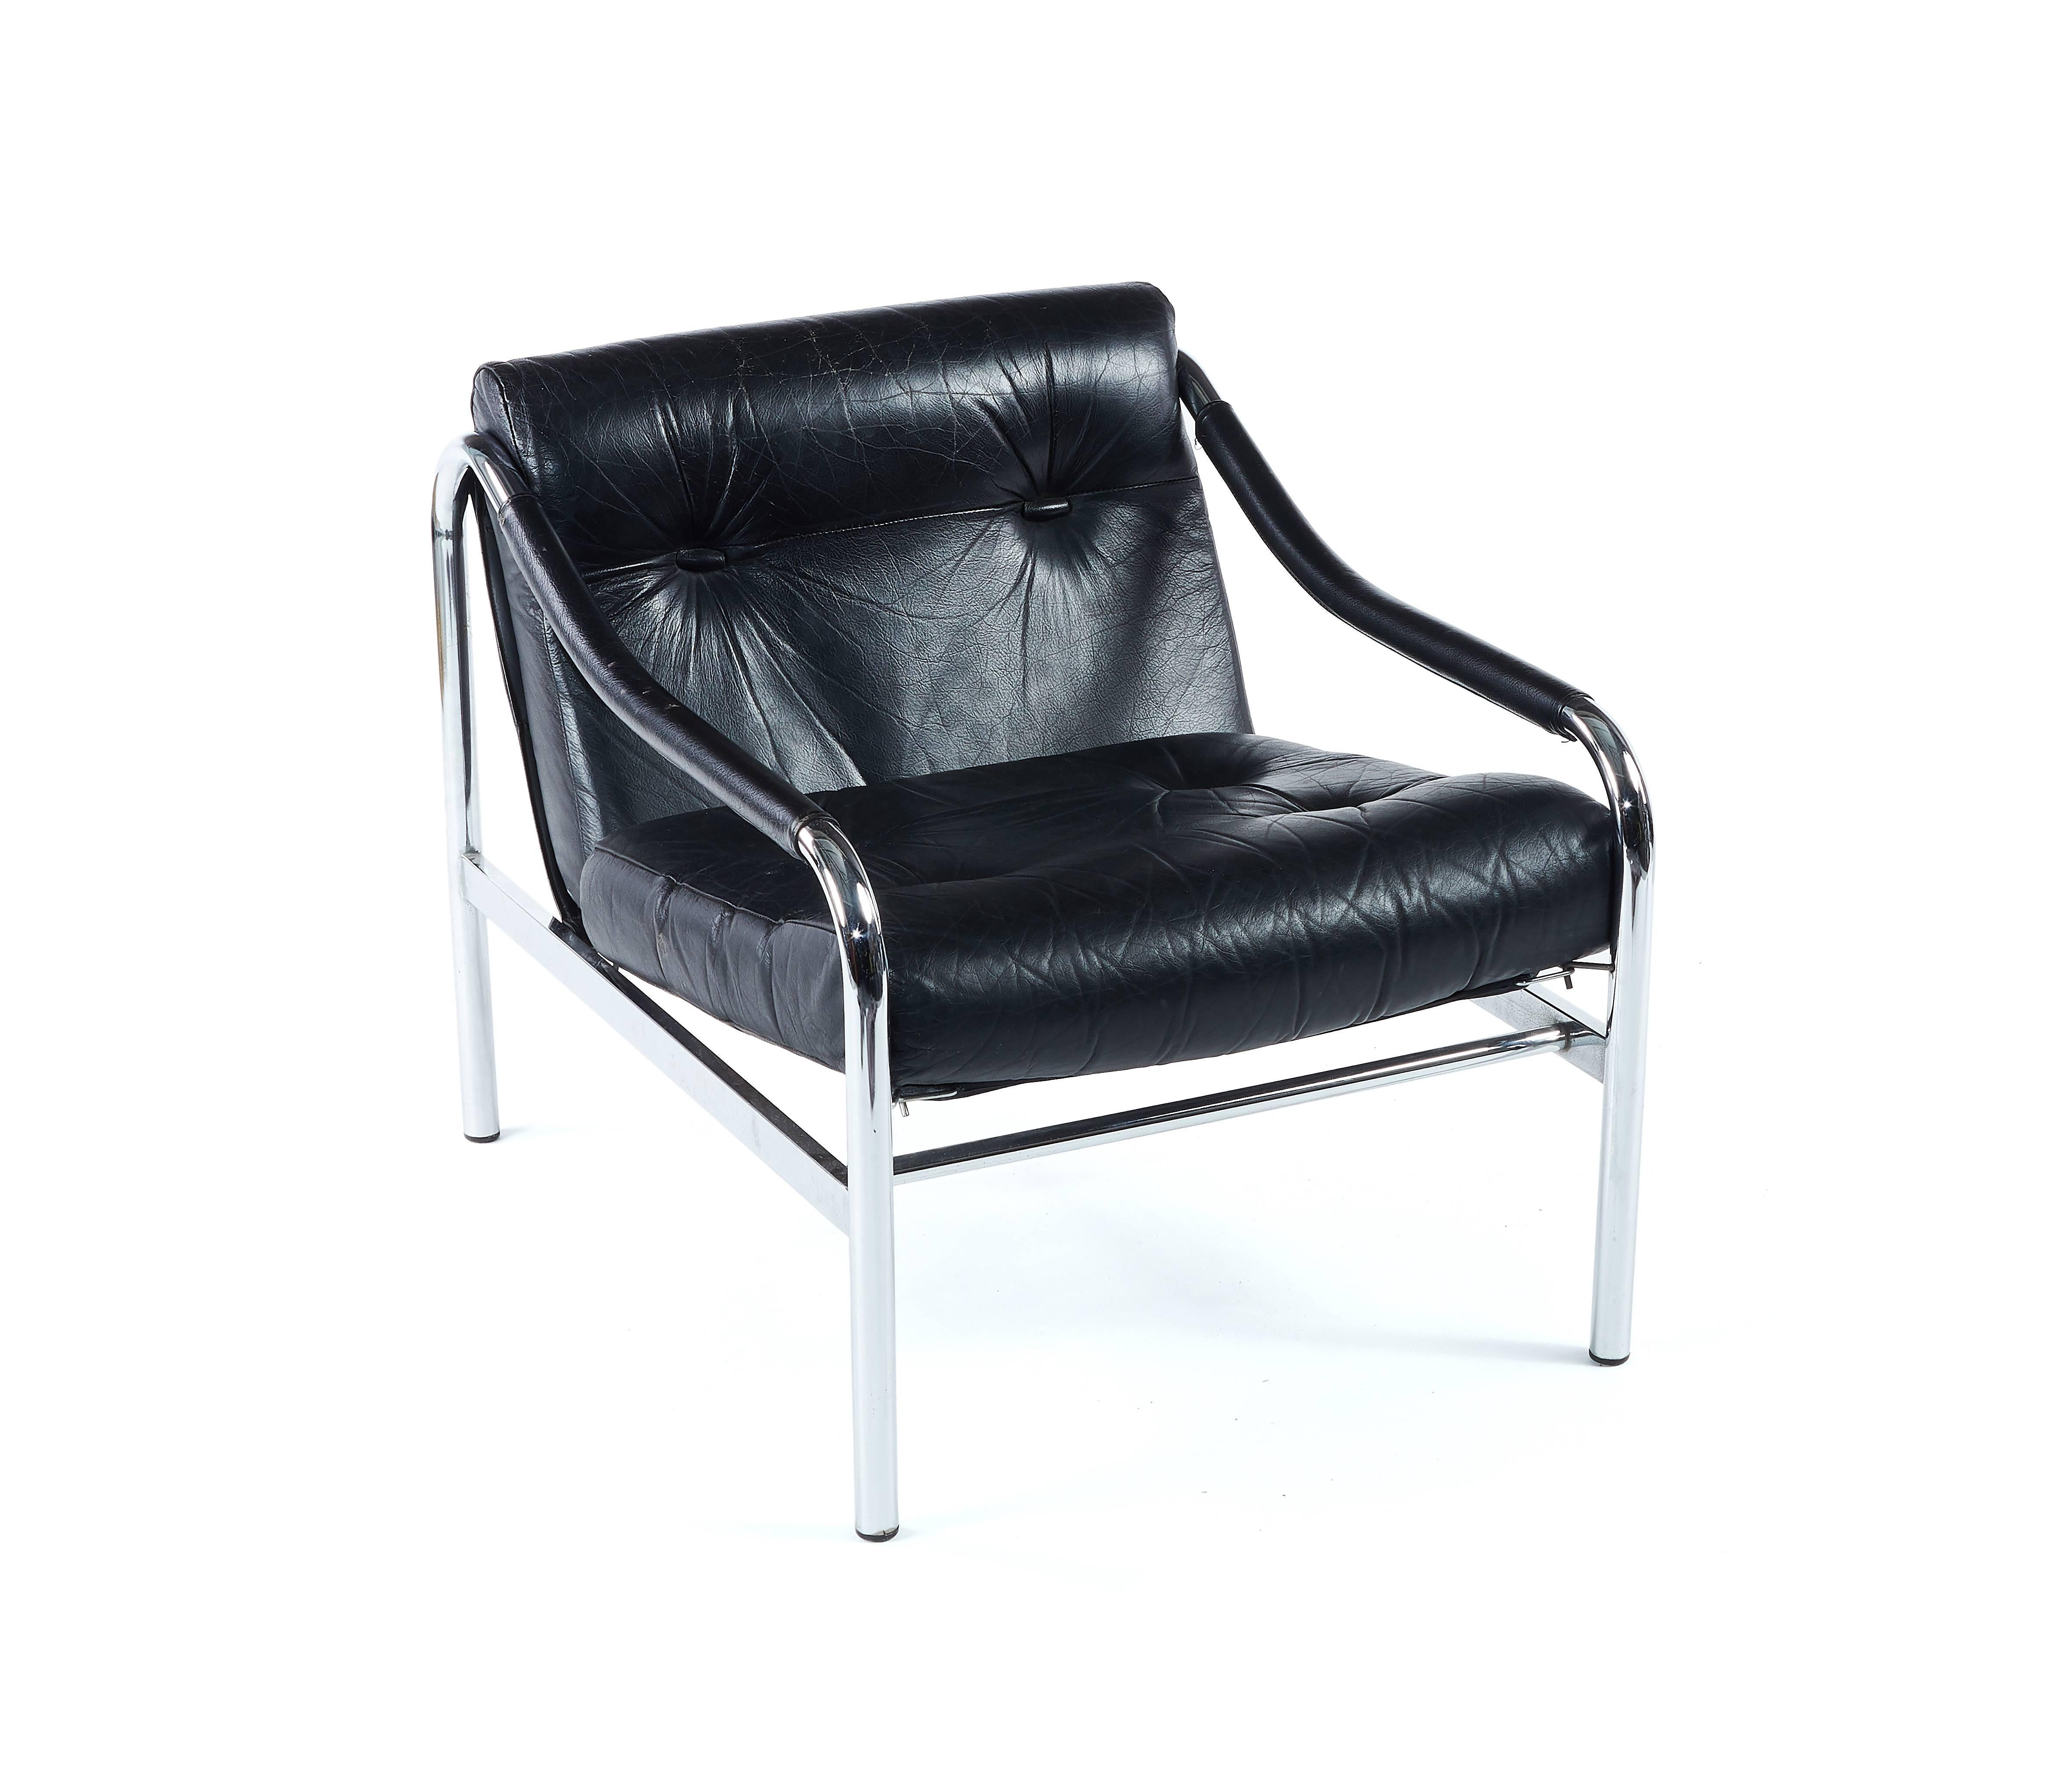 A mid-1970s black leather and chrome suite of Kadia seat furniture by Pieff
Comprising a lounge armchair, a two-seat and a three-seat sofa, the tubular chrome frames with removable buttoned cushions, with Pirelli rubber seat diaphragms, the chair